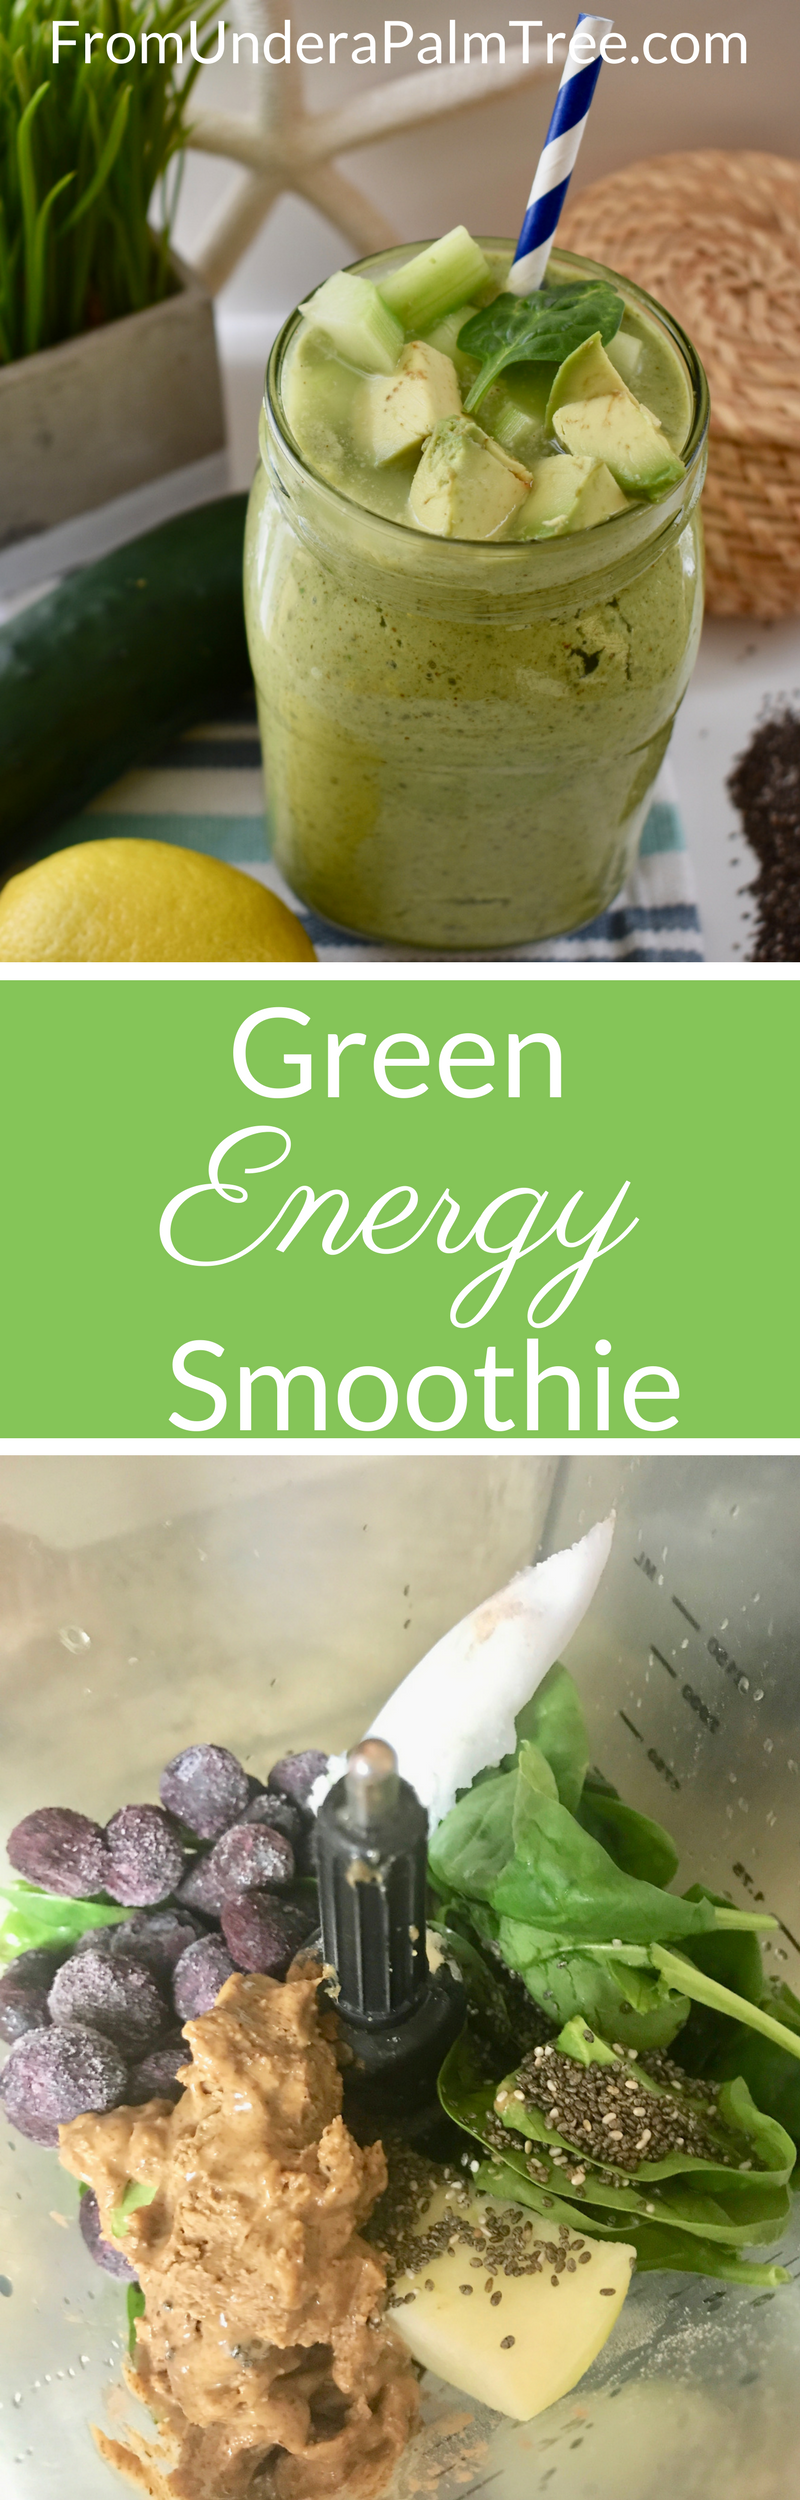 Green Energy Smoothie | Green Smoothie | Smoothie Recipe | Healthy Smoothie | Breakfast Smoothie Recipe | Meal Replacement Smoothie | Protein Smoothie Recipe | Protein Smoothie | Protein Drink | Veggie Smoothie | Vegetable Smoothie | What to put in a veggie smoothie | 